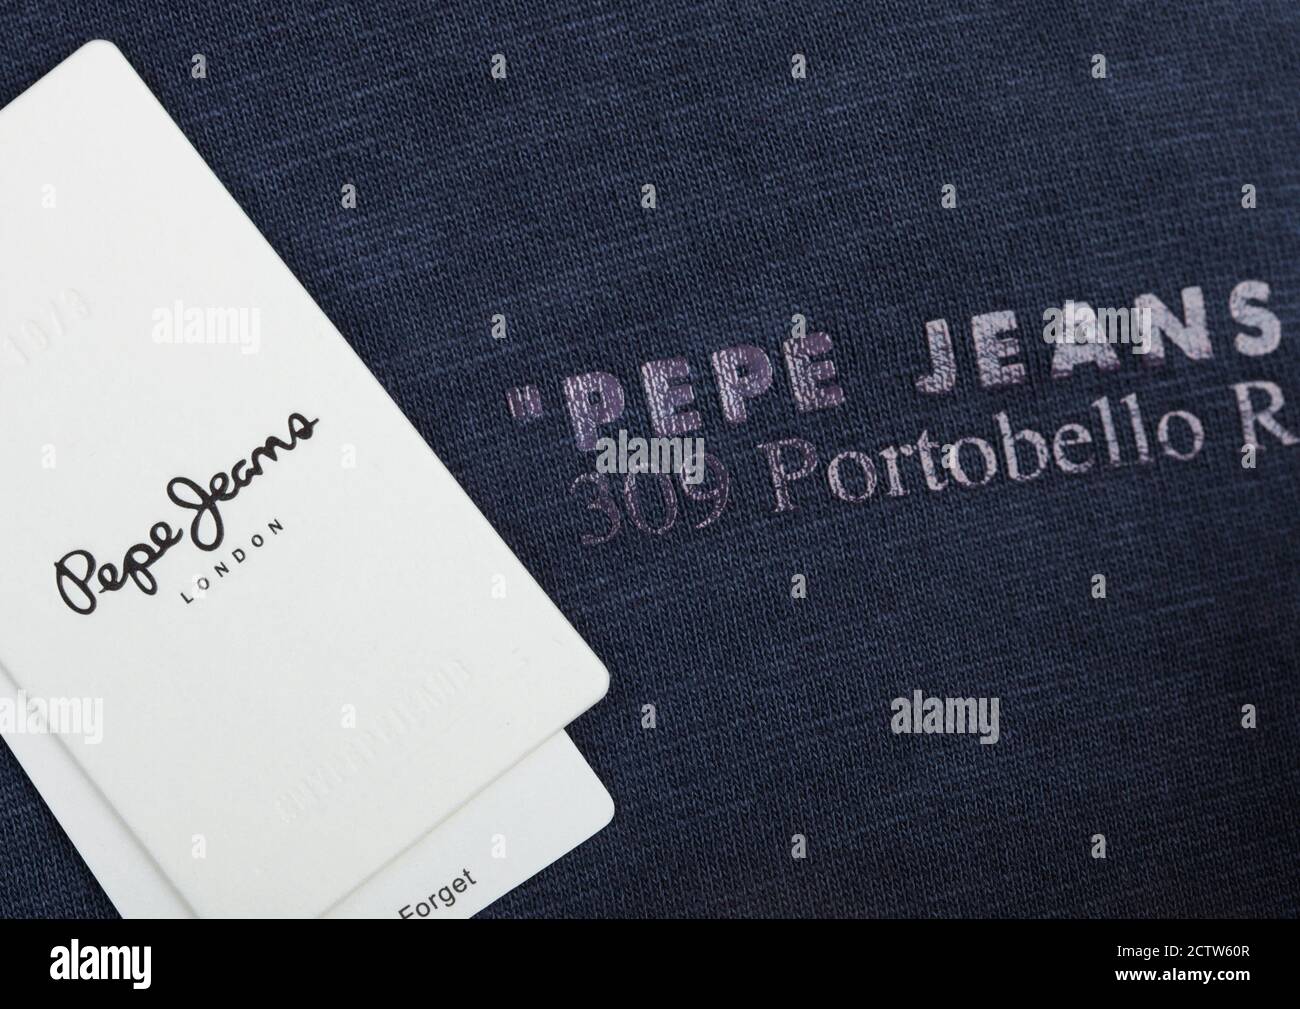 LONDON, UK - SEPTEMBER 09, 2020: Pepe Jeans label and clothing tag on dark  cotton fabric Stock Photo - Alamy